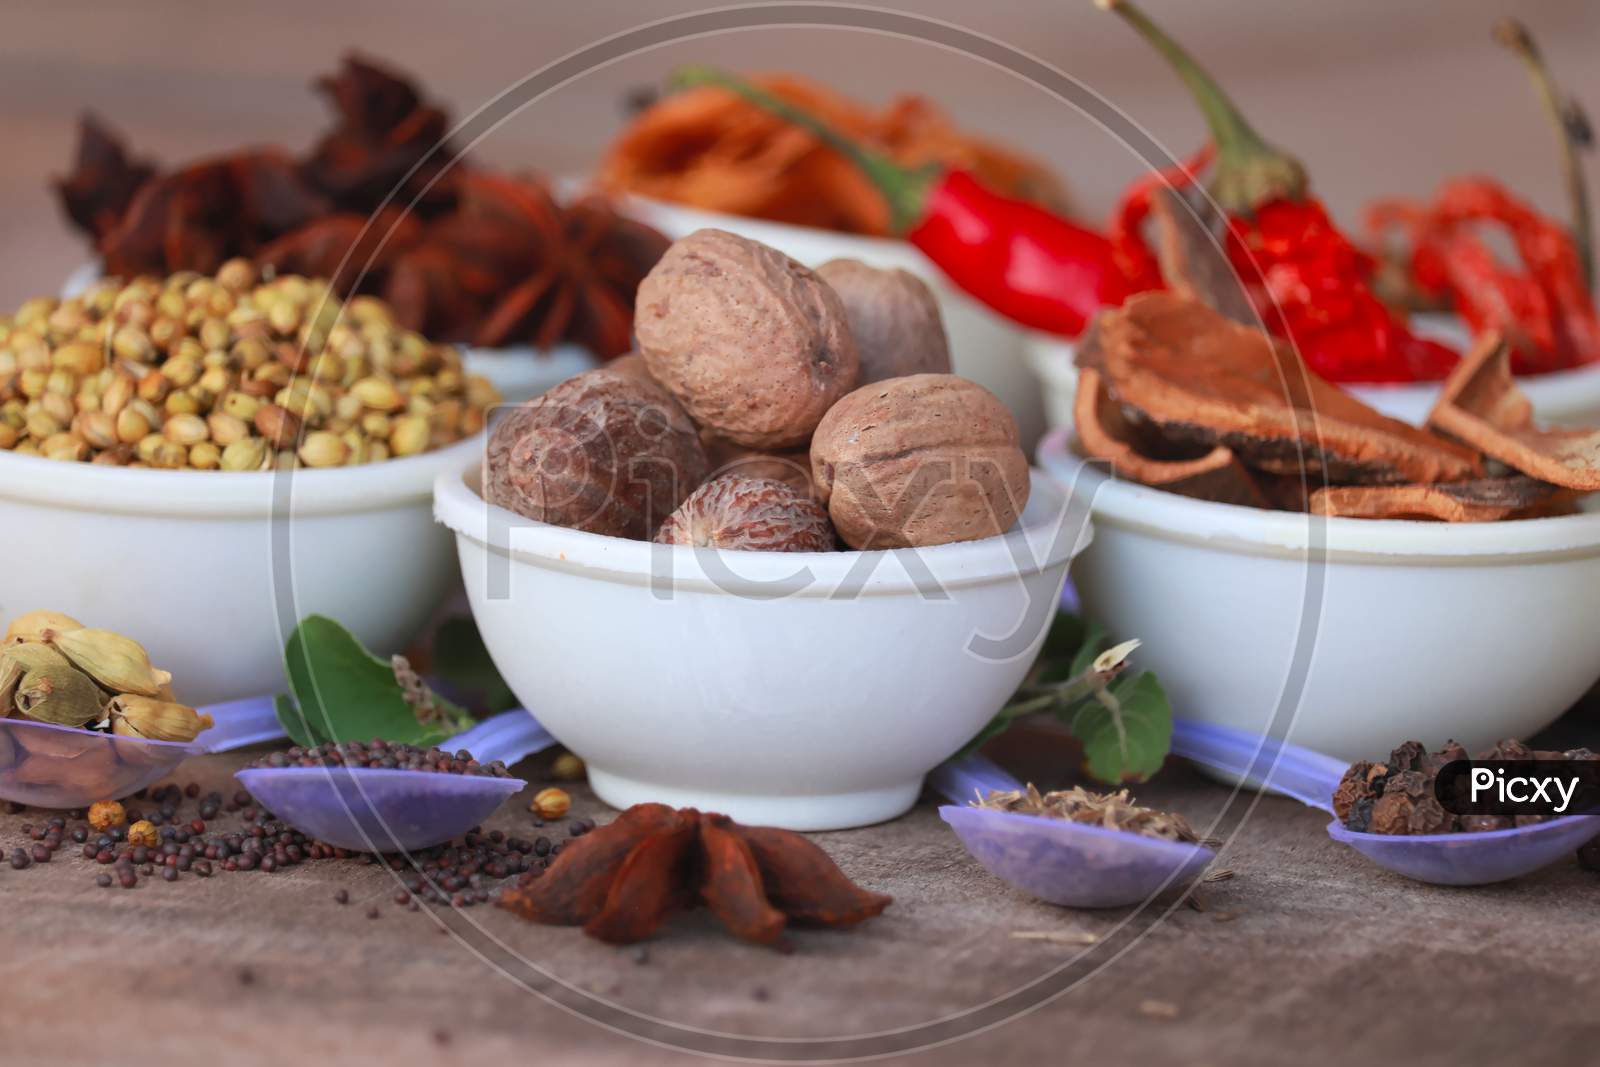 Group Of Indian Spices And Herbs Difference Ware On Wooden Teblet,Different Spices In Spoons On Table,Indian Bay Leaf, Garam Masala, Mace, Javitri, Nutmeg, Jaipha